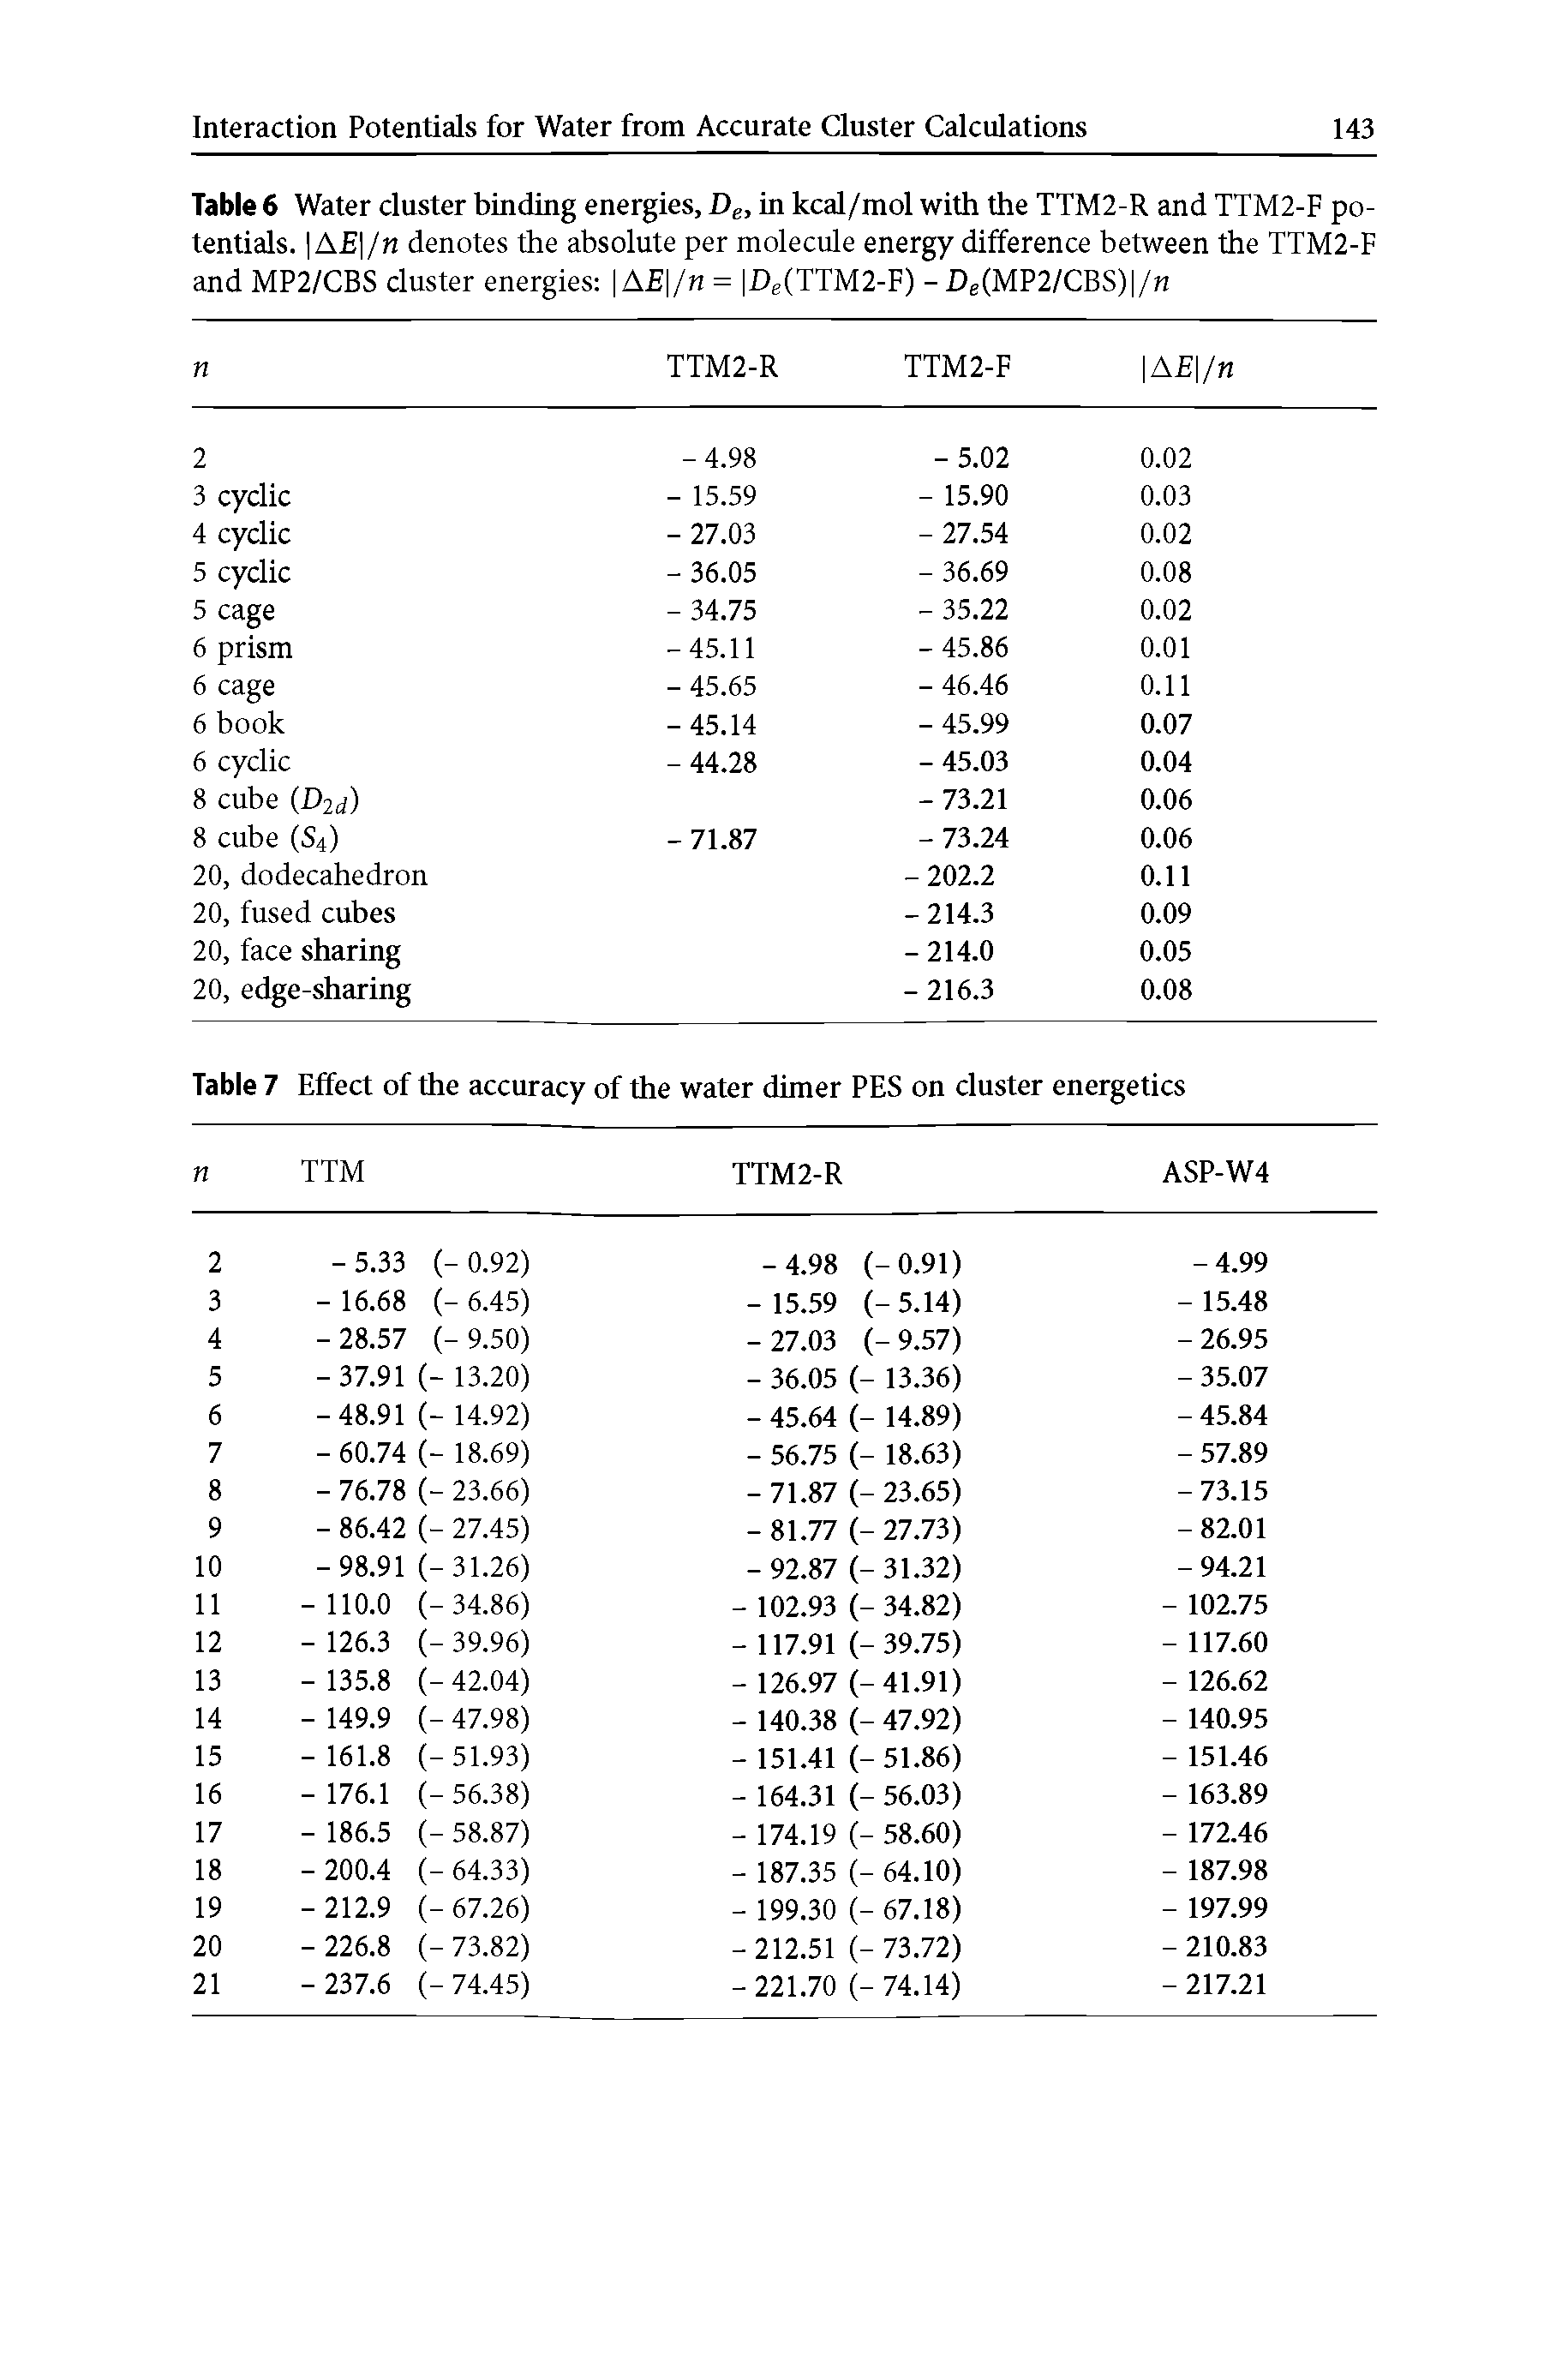 Table 6 Water cluster binding energies, Dg, in kcal/mol with the TTM2-R and TTM2-F potentials. I A /n denotes the absolute per molecule energy difference between the TTM2-F and MP2/CBS cluster energies AE /n = De(TTM2-F) -De(MP2/CBS) / ...